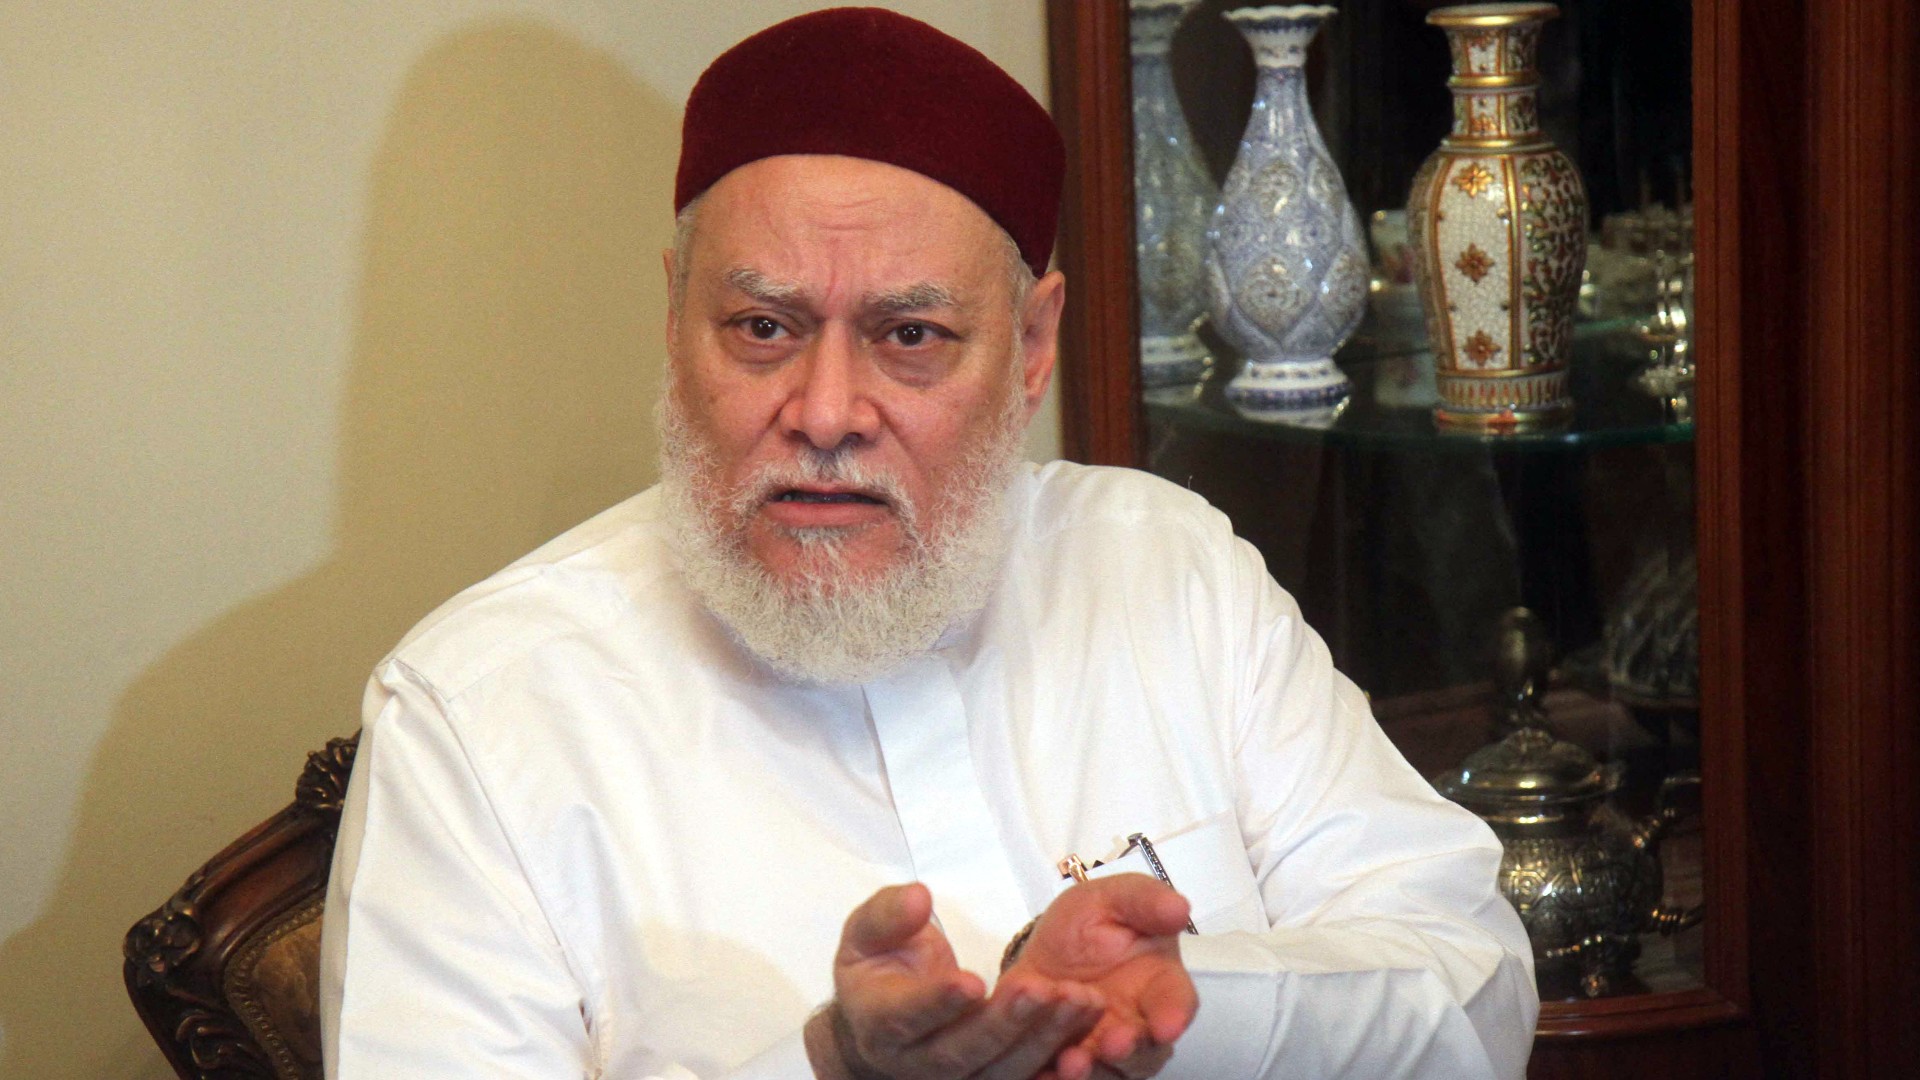 Former Egyptian mufti Ali Gomaa speaks to reporters at his home in Cairo's October 6 suburb on August 5, 2016 following a shooting that targeted him at the Fadil mosque.